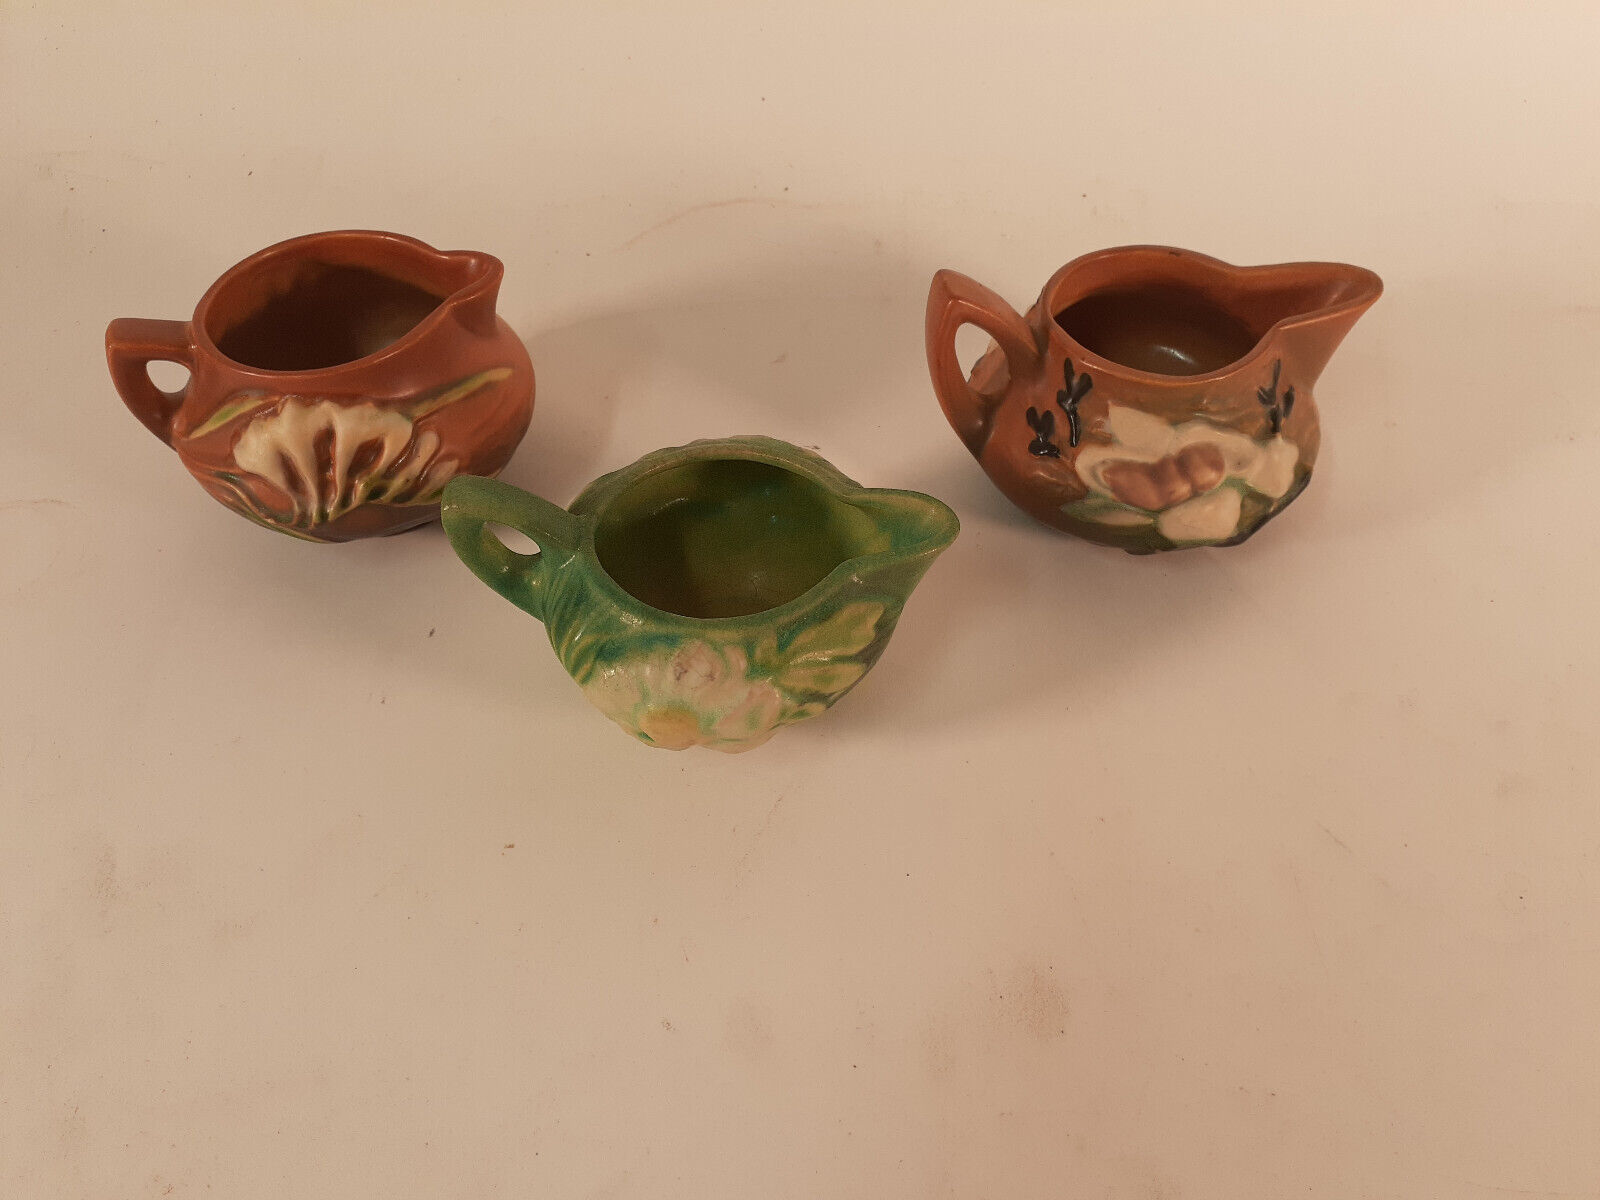 Primary image for Roseville Pottery Creamers, Estate Lot of 3, Very Good Condition